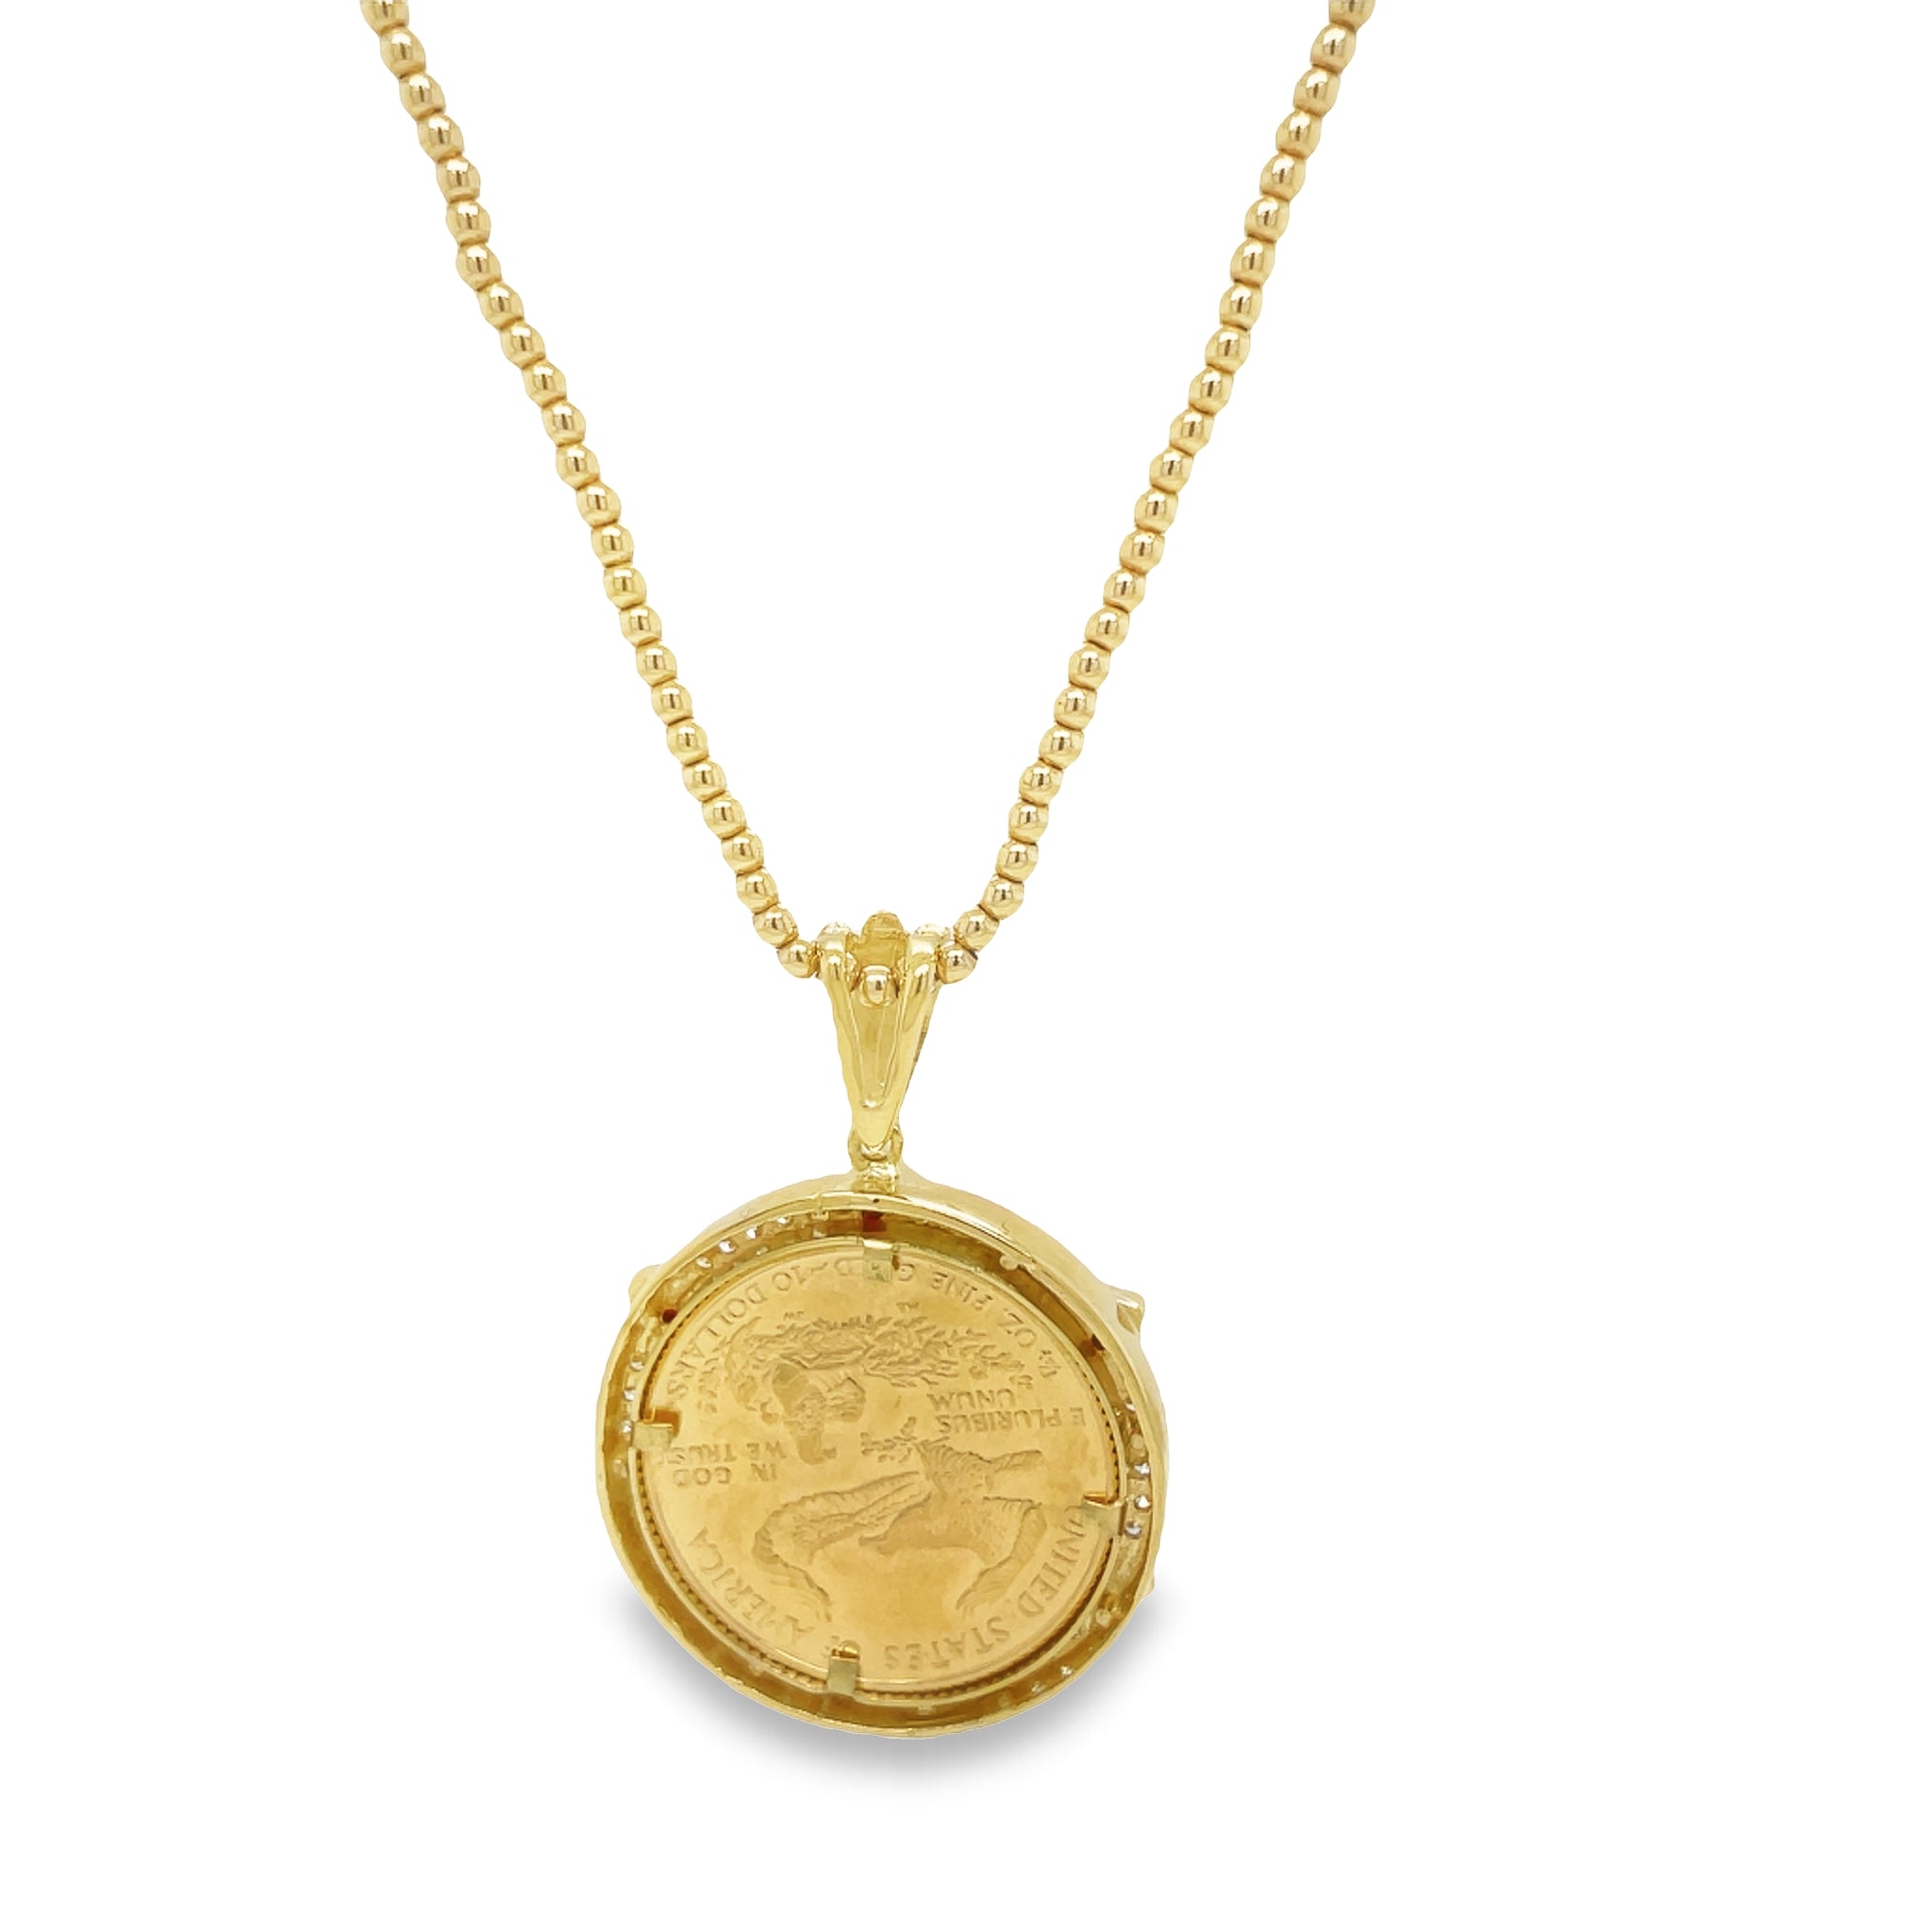 This stunning necklace features an original 1/4 oz American Eagle coin encased in an impressive bezel frame made up of 1.00 cts round diamonds and 6 rubies. A strong bail hold the bezel in place, making it a secure and beautiful addition to any jewelry collection. An 18" bead chain is available for an additional cost ($999 -441-220)